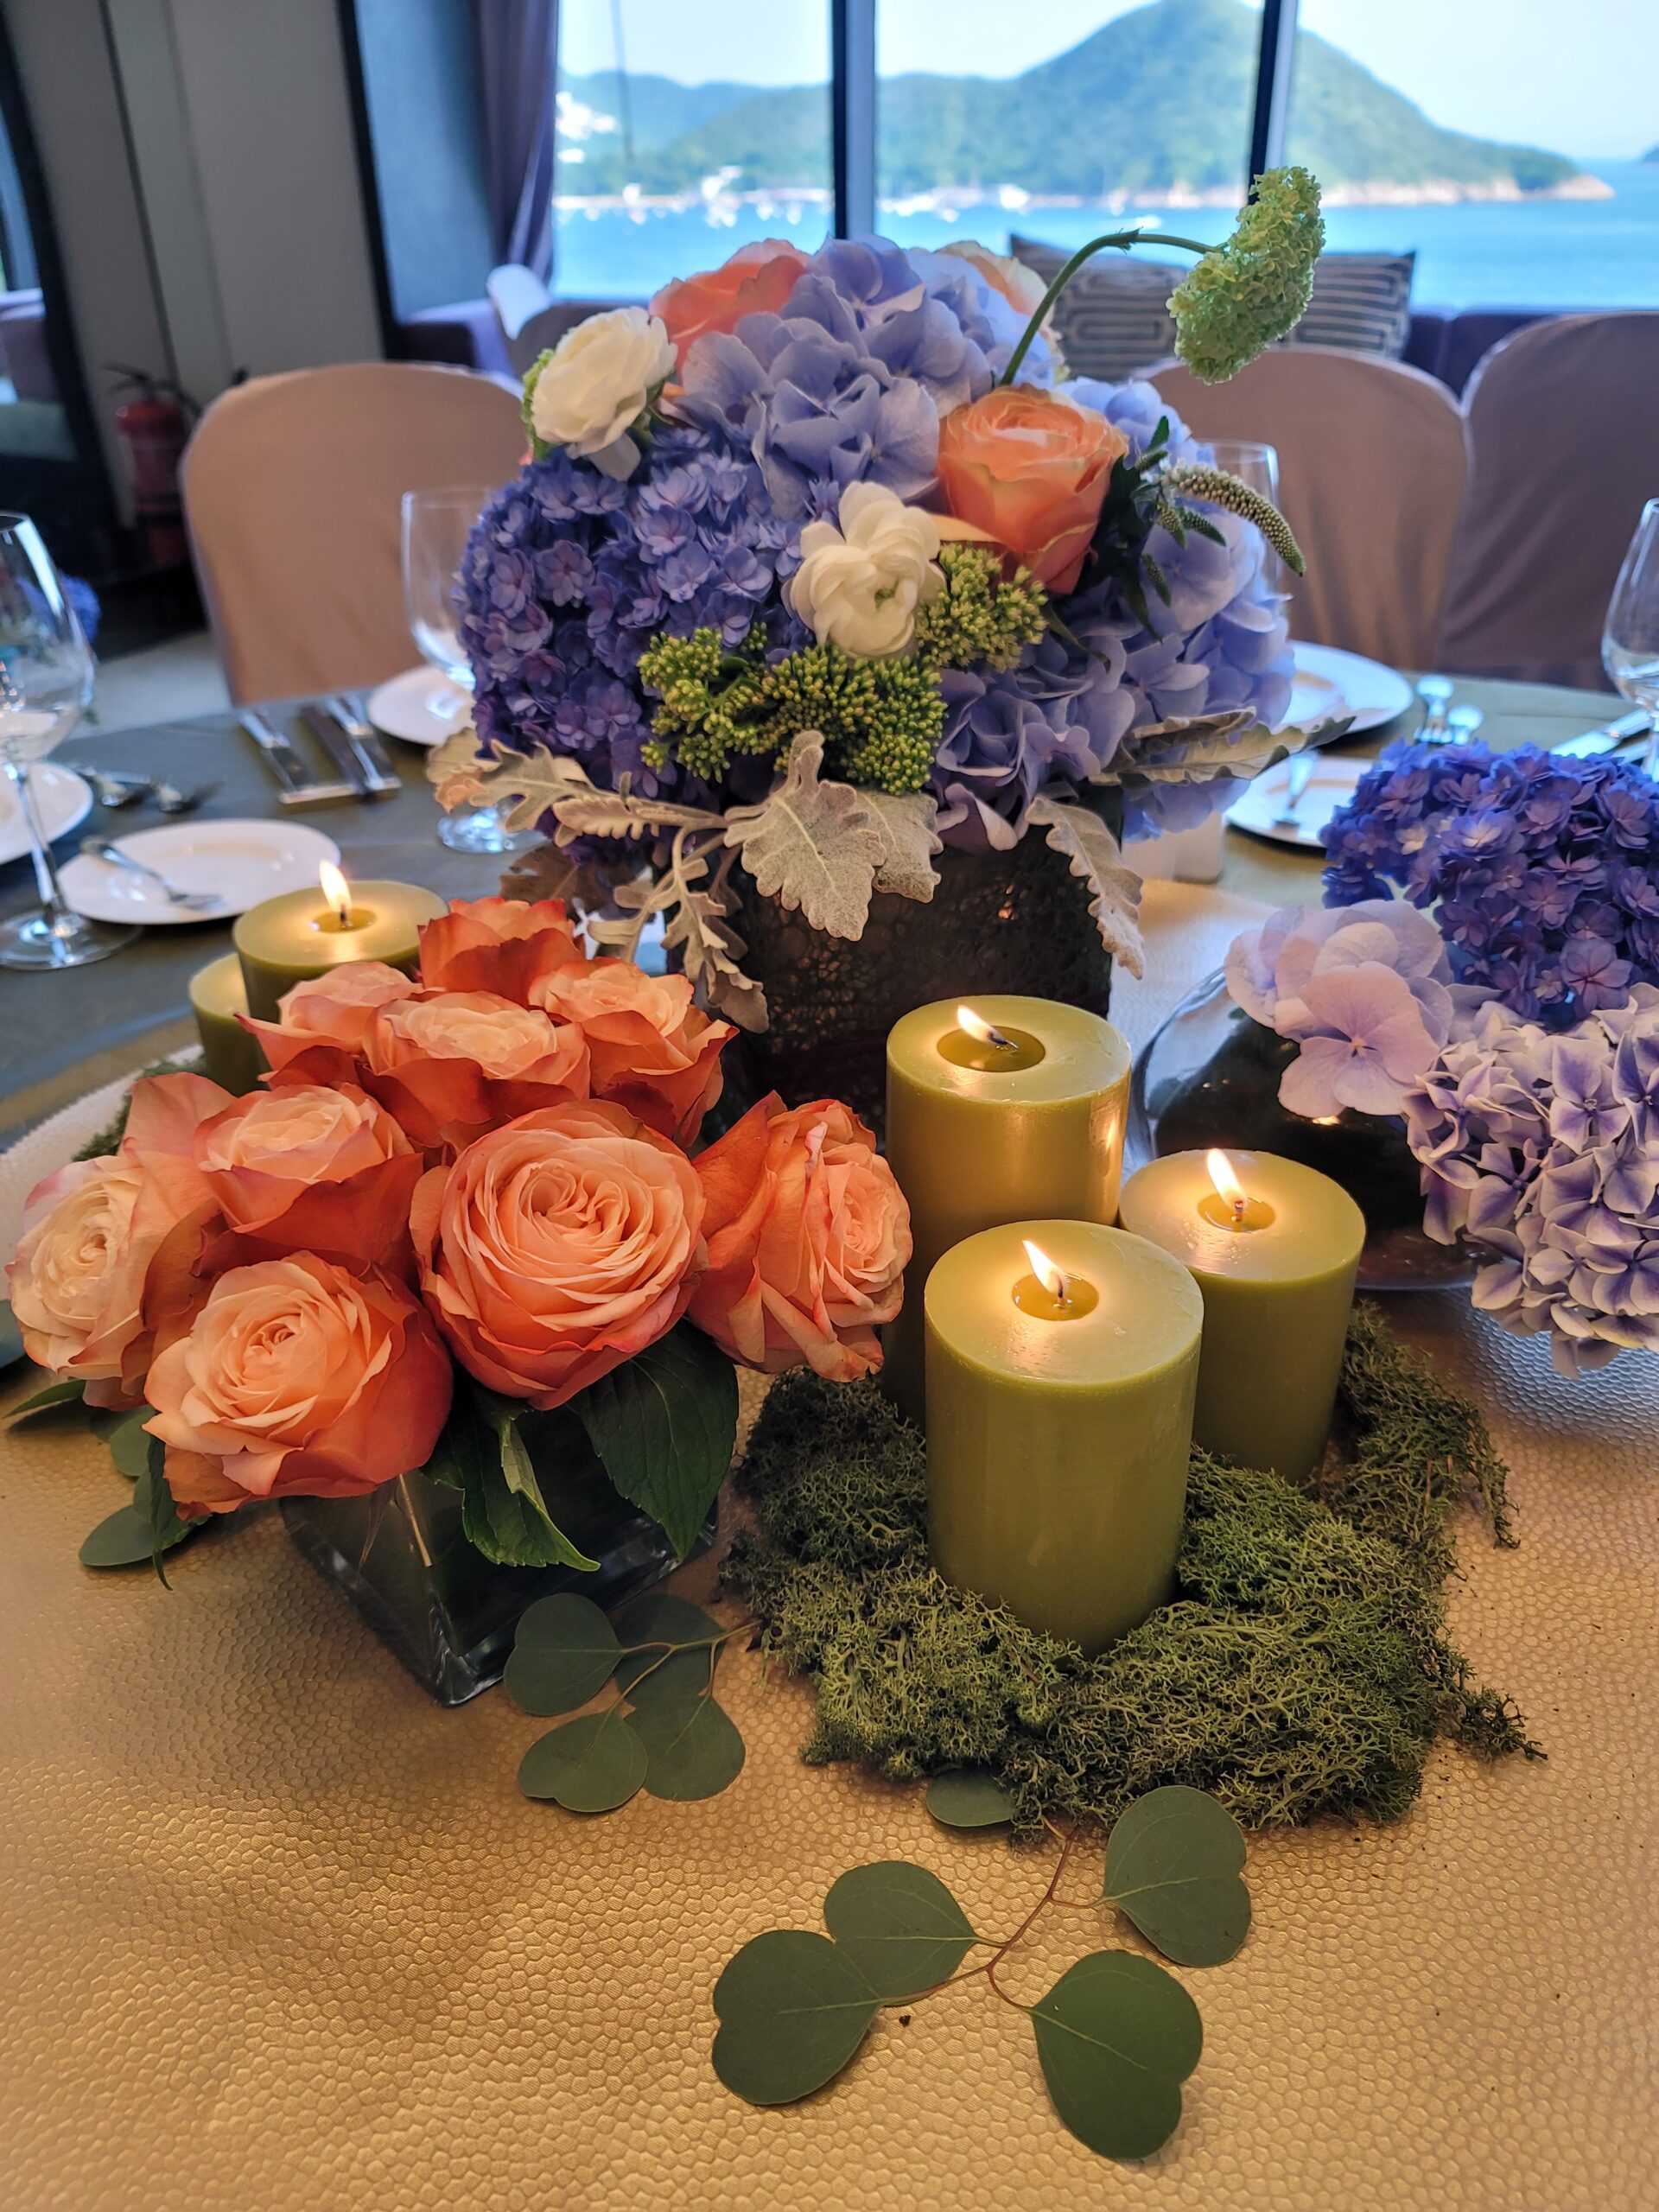 Luxurious flower arrangements united with candles, illustrating the magic number 5 in crafting harmonious table centerpieces.